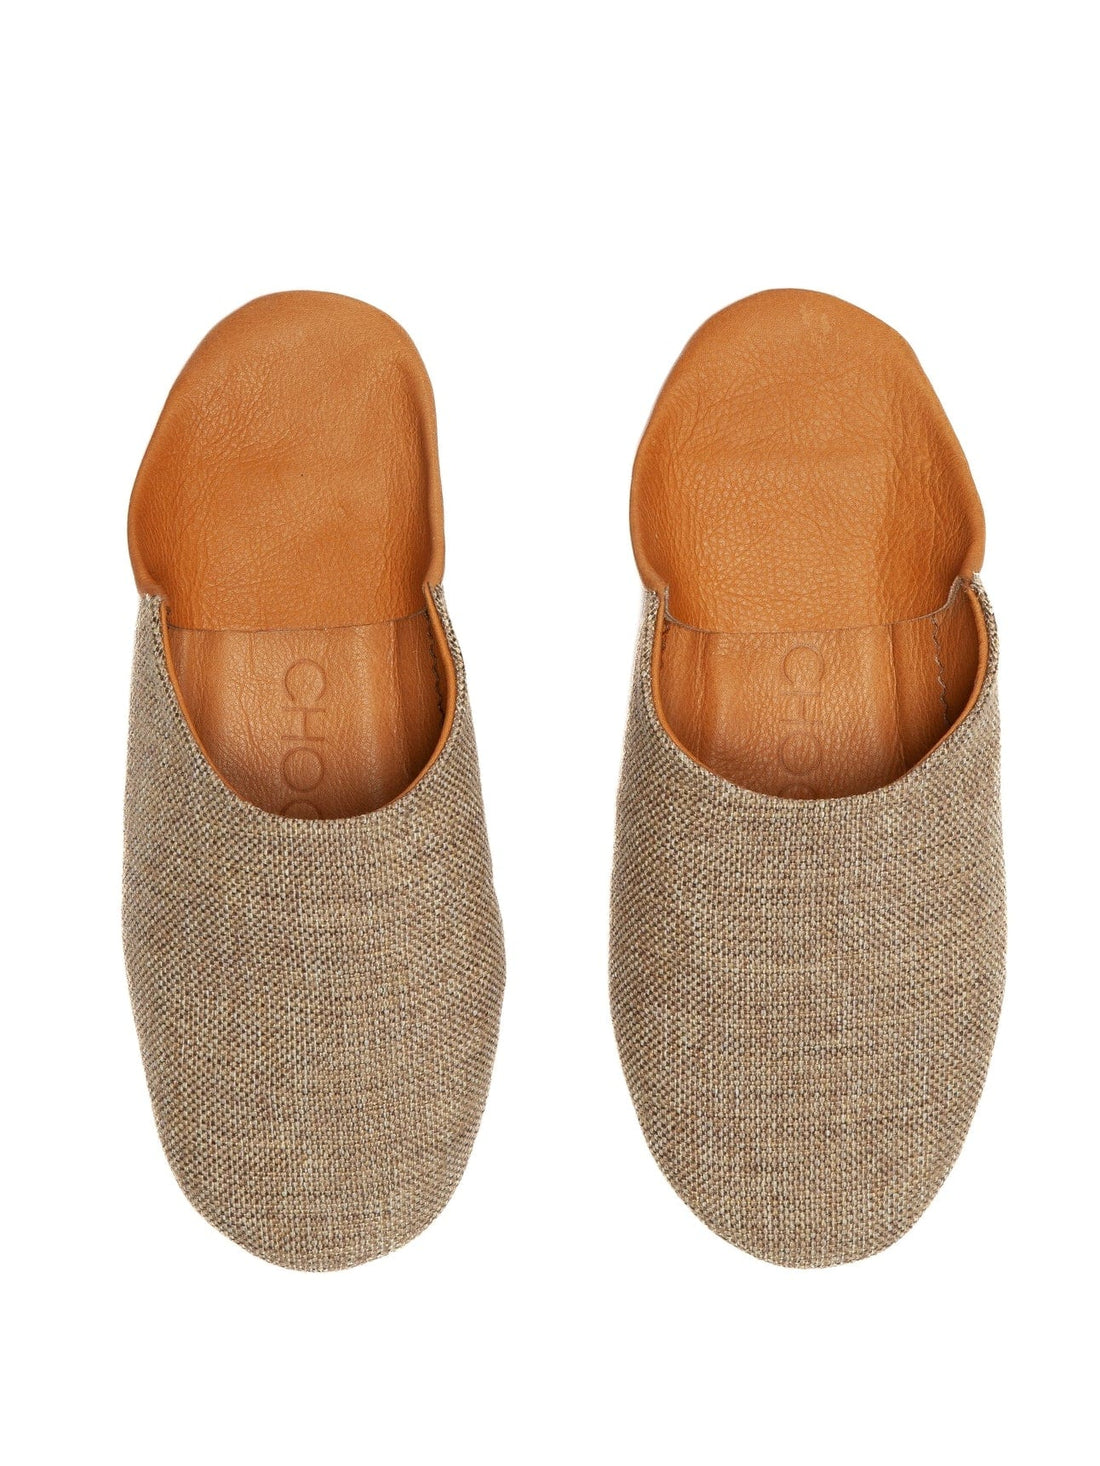 Leather &amp; Linen Slippers, Size 12.5 / 45-46